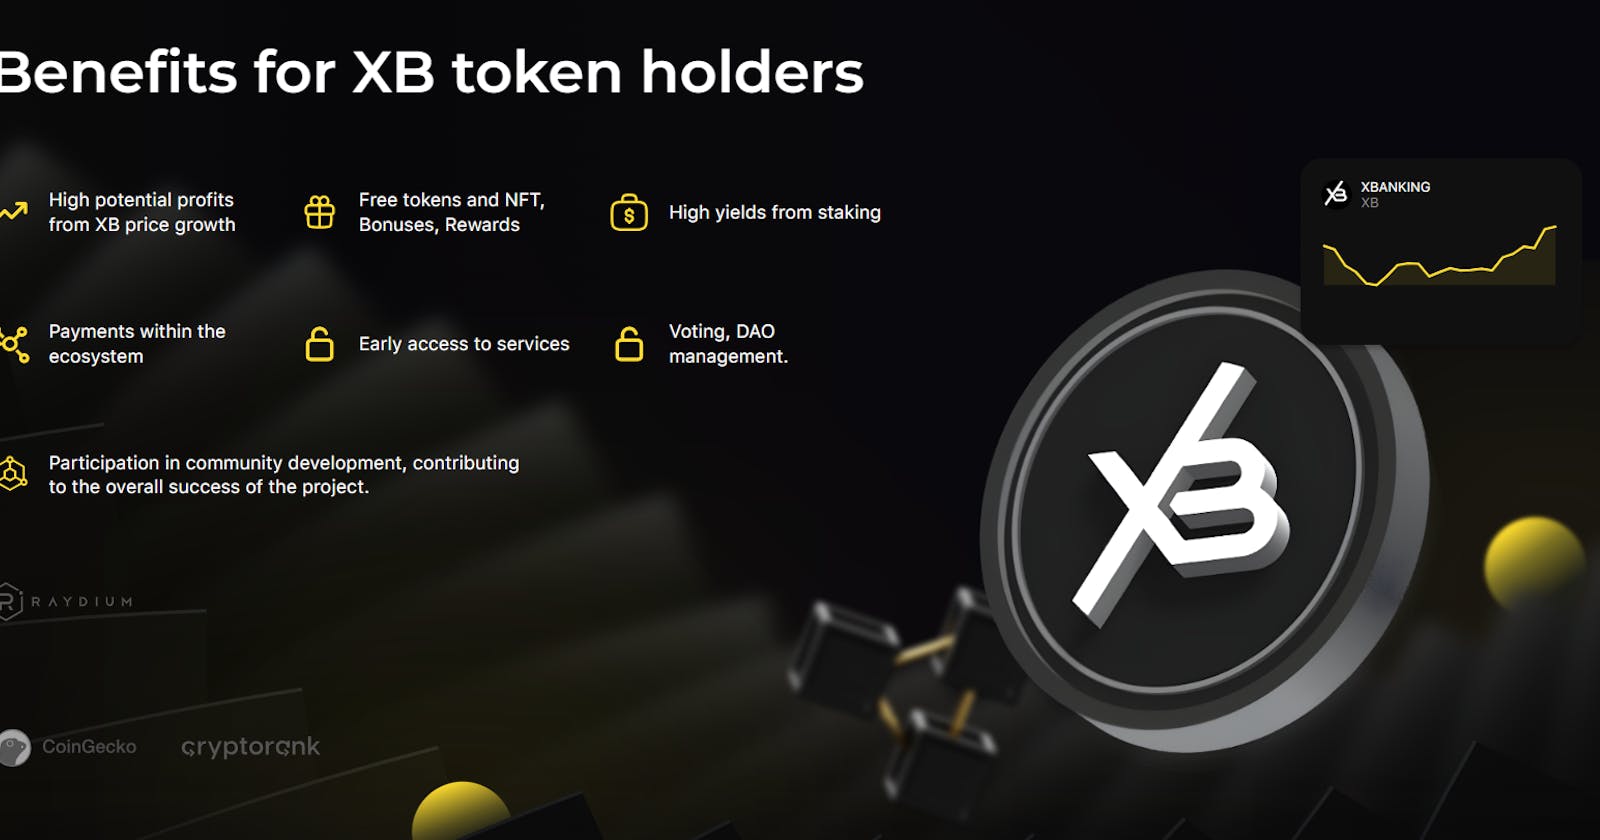 XBANKING (XB) is the most undervalued token!?